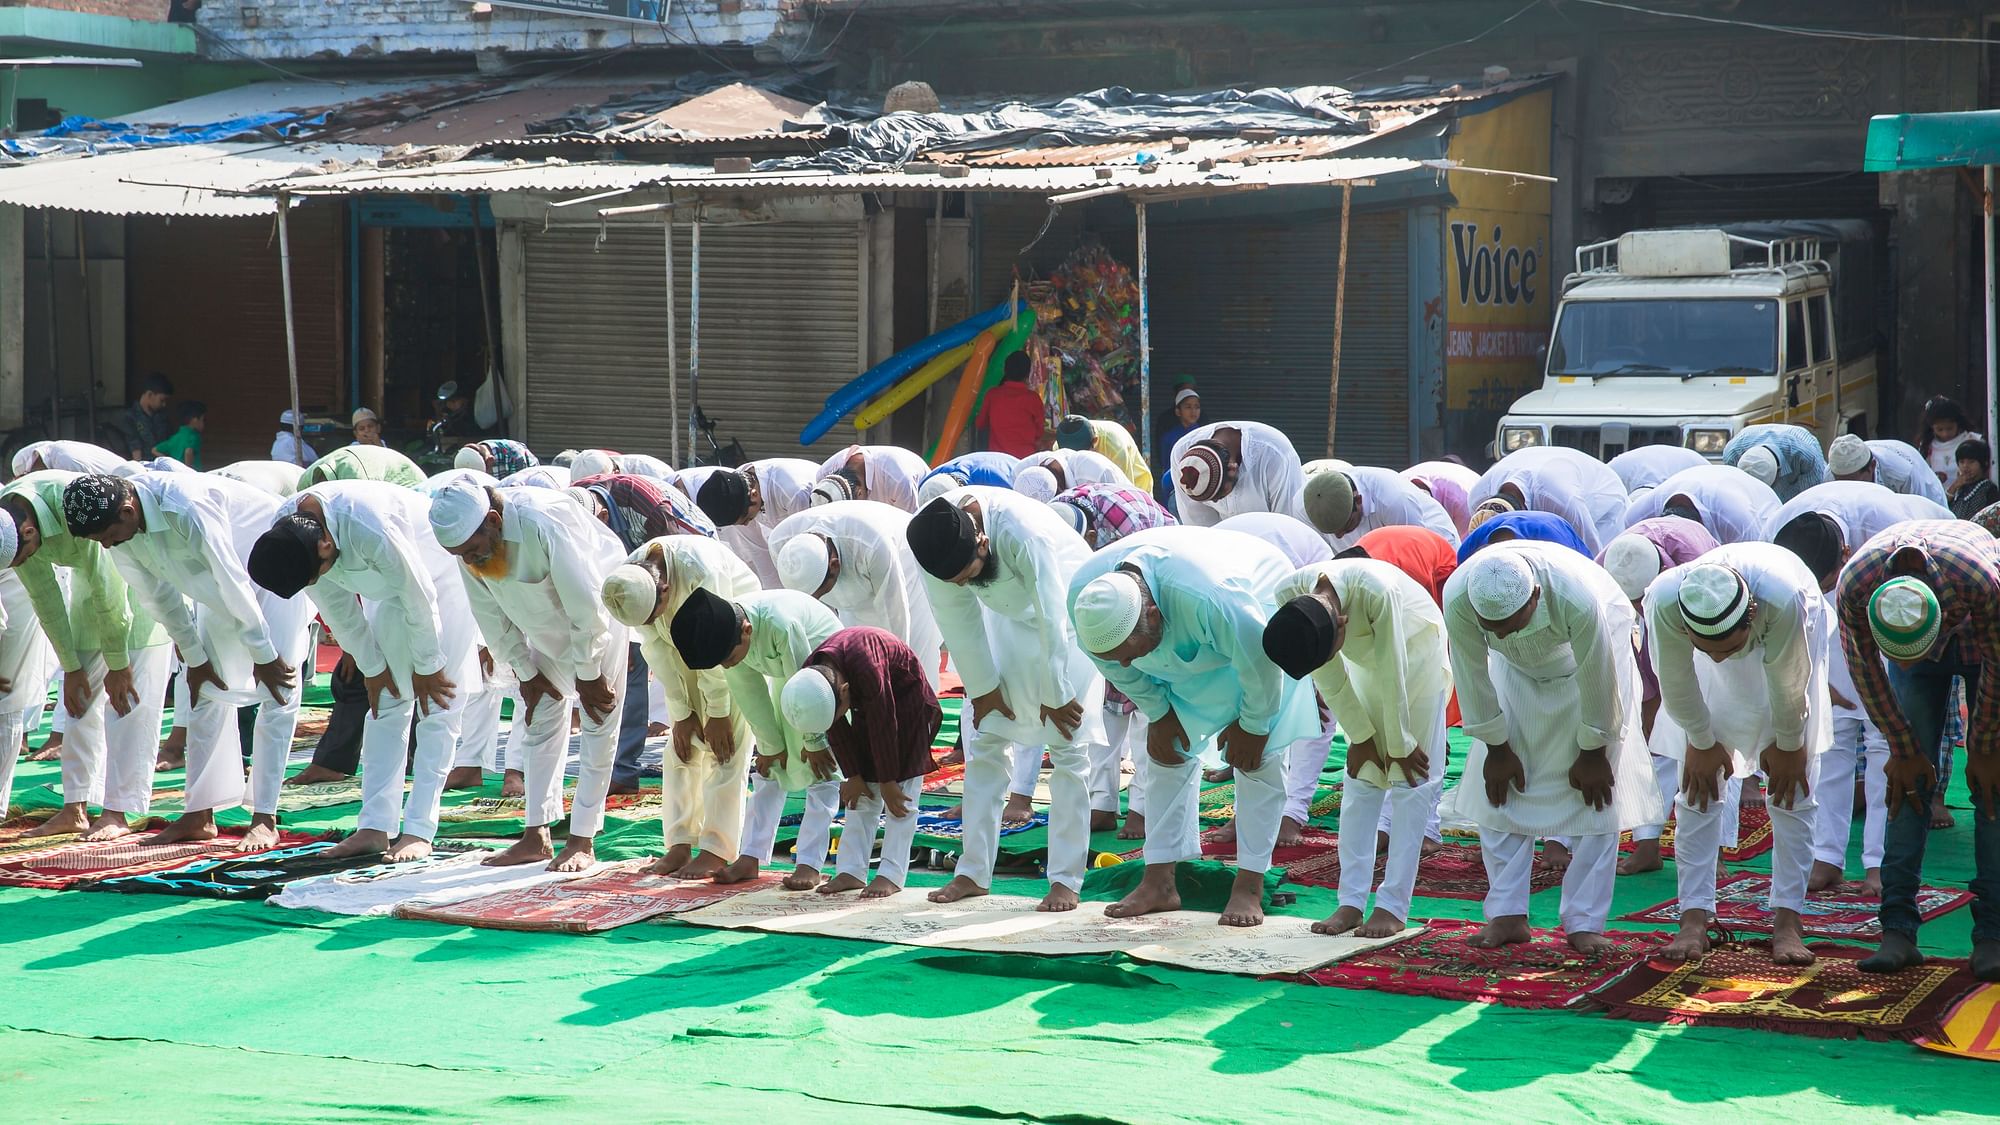 Large group of people praying Namaz on Eil-al-adha, on the street. Image used for representation.